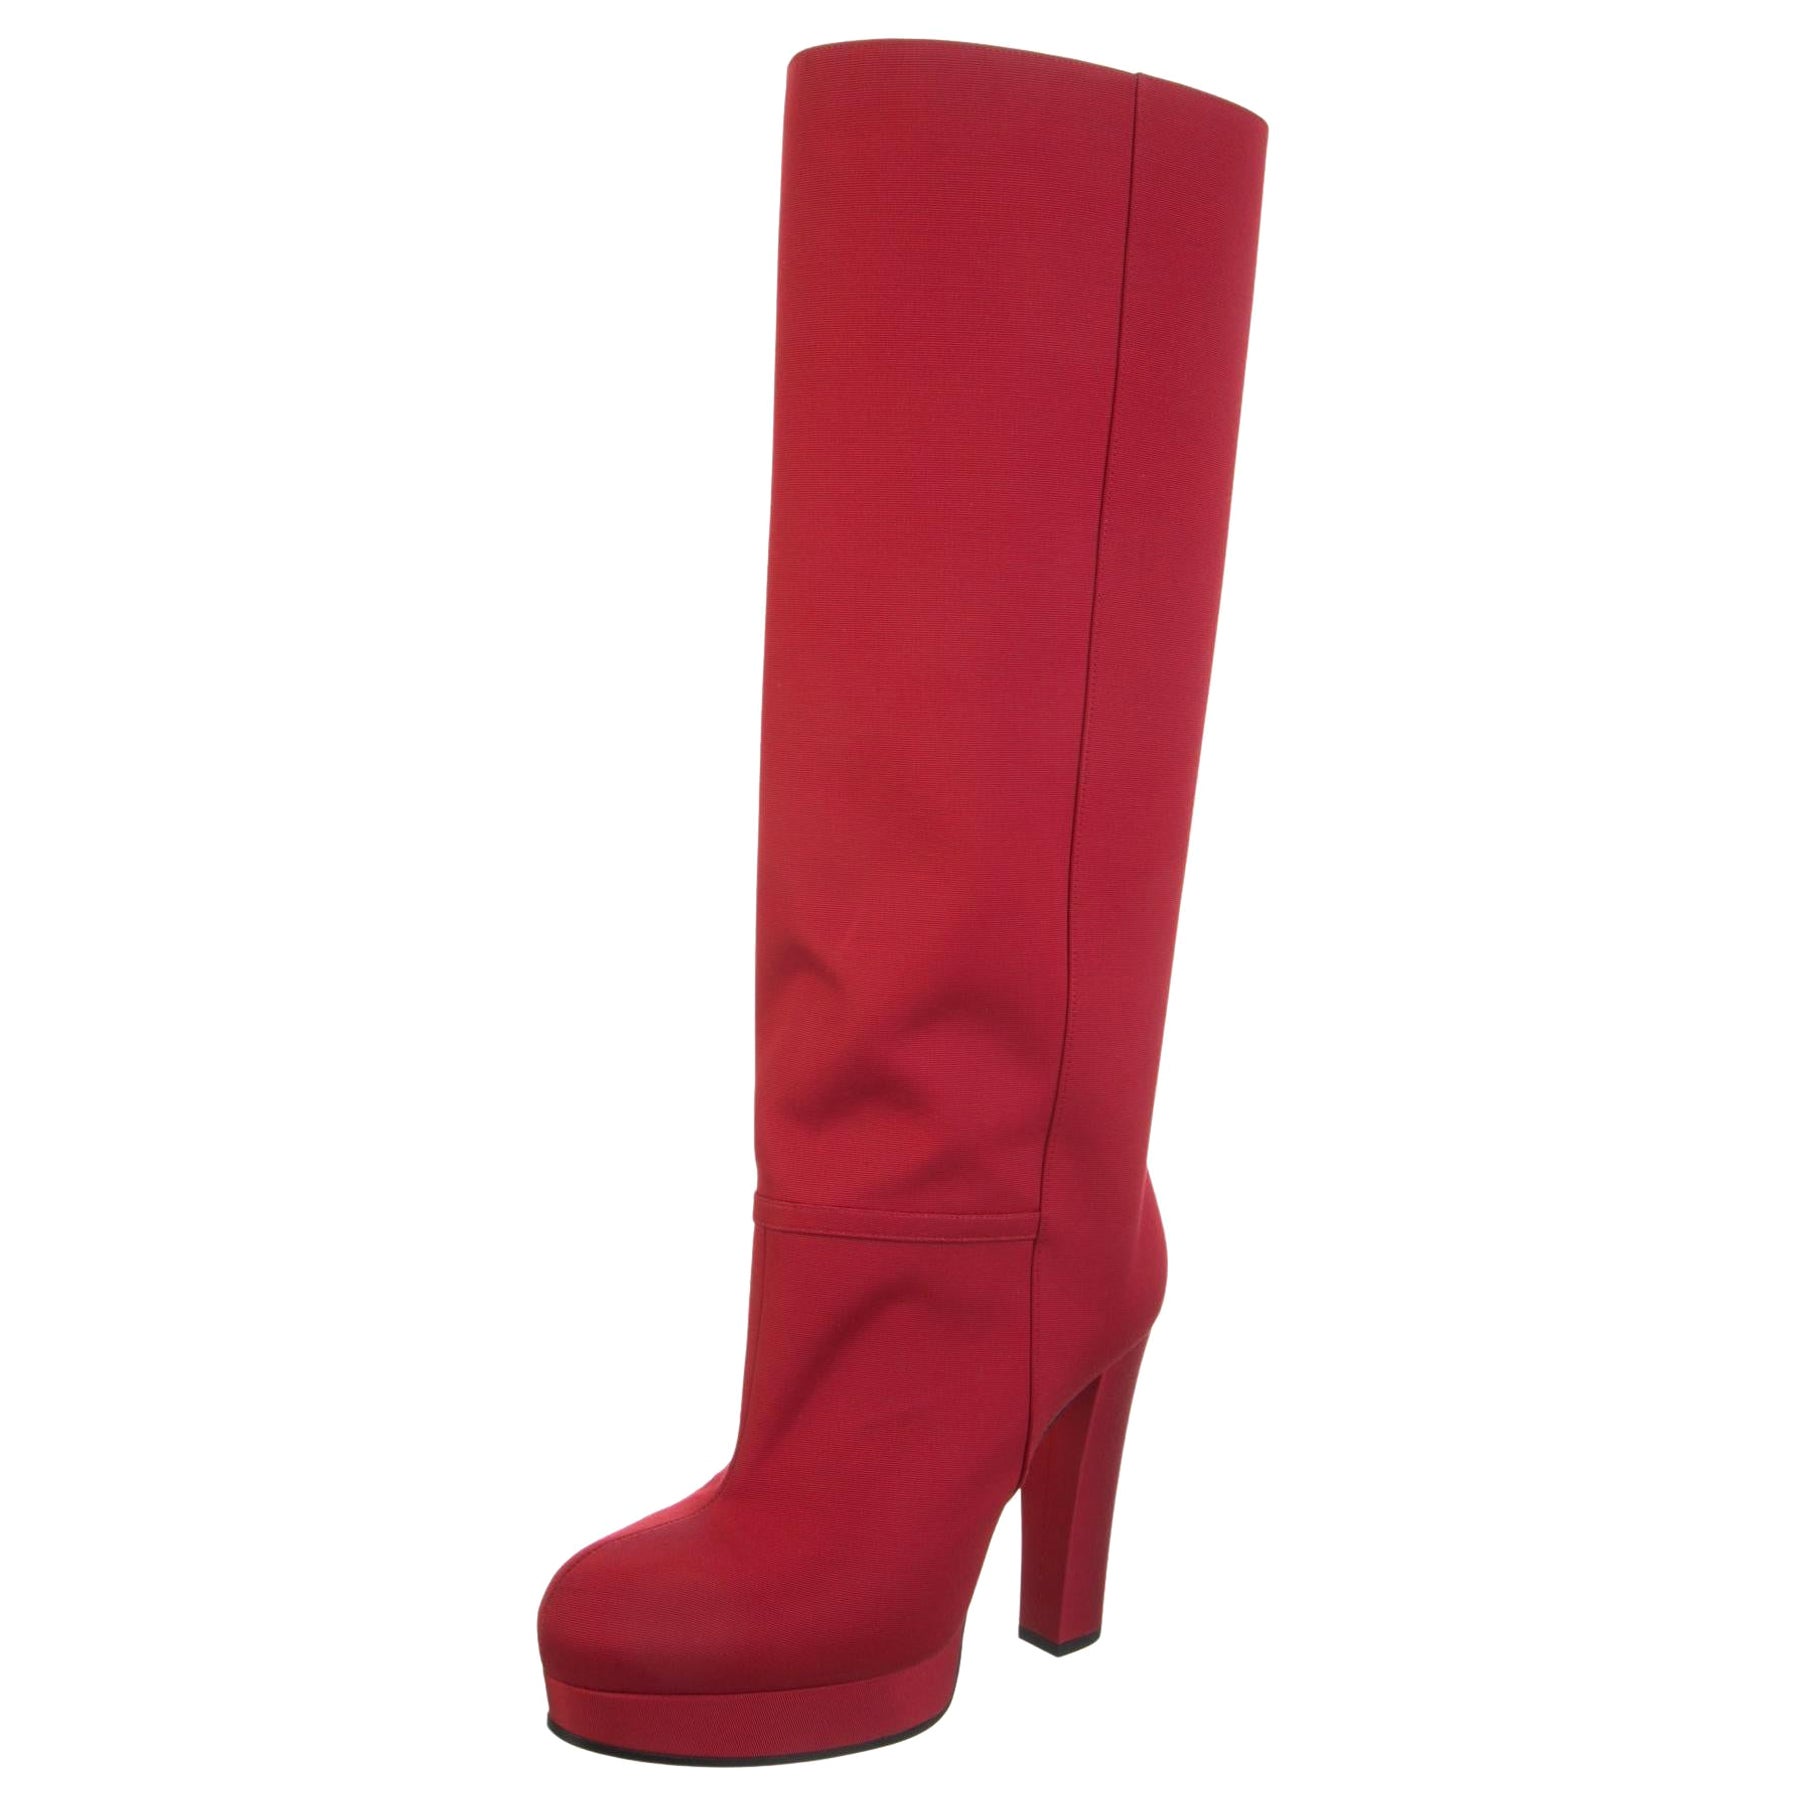 New With Box Gucci Fall 2019 Alessandro Michele Red Boots Sz 38 For Sale